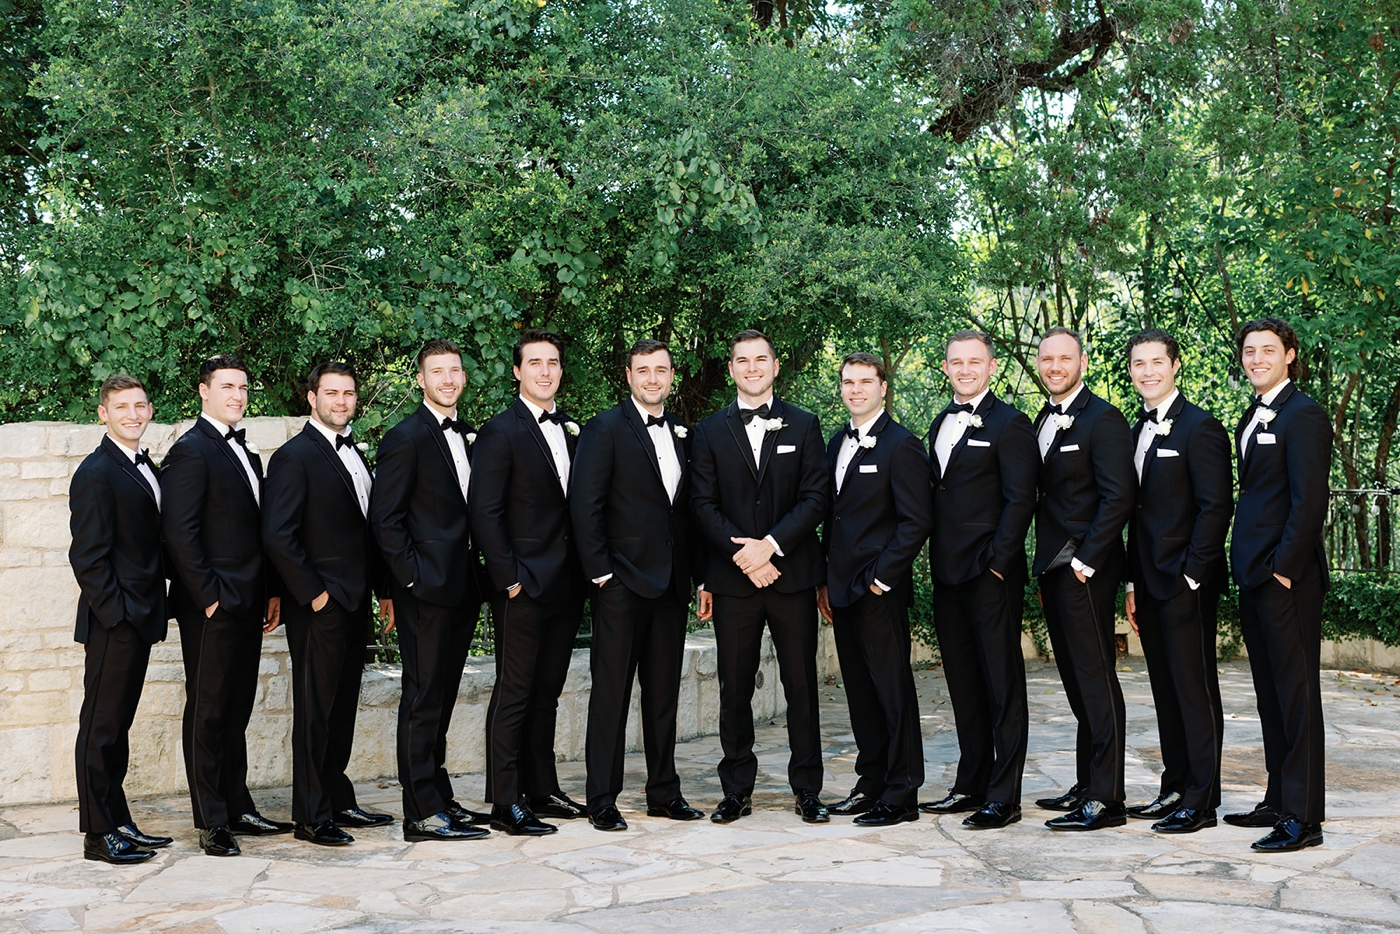 Bridal party portraits at Austin Country Club